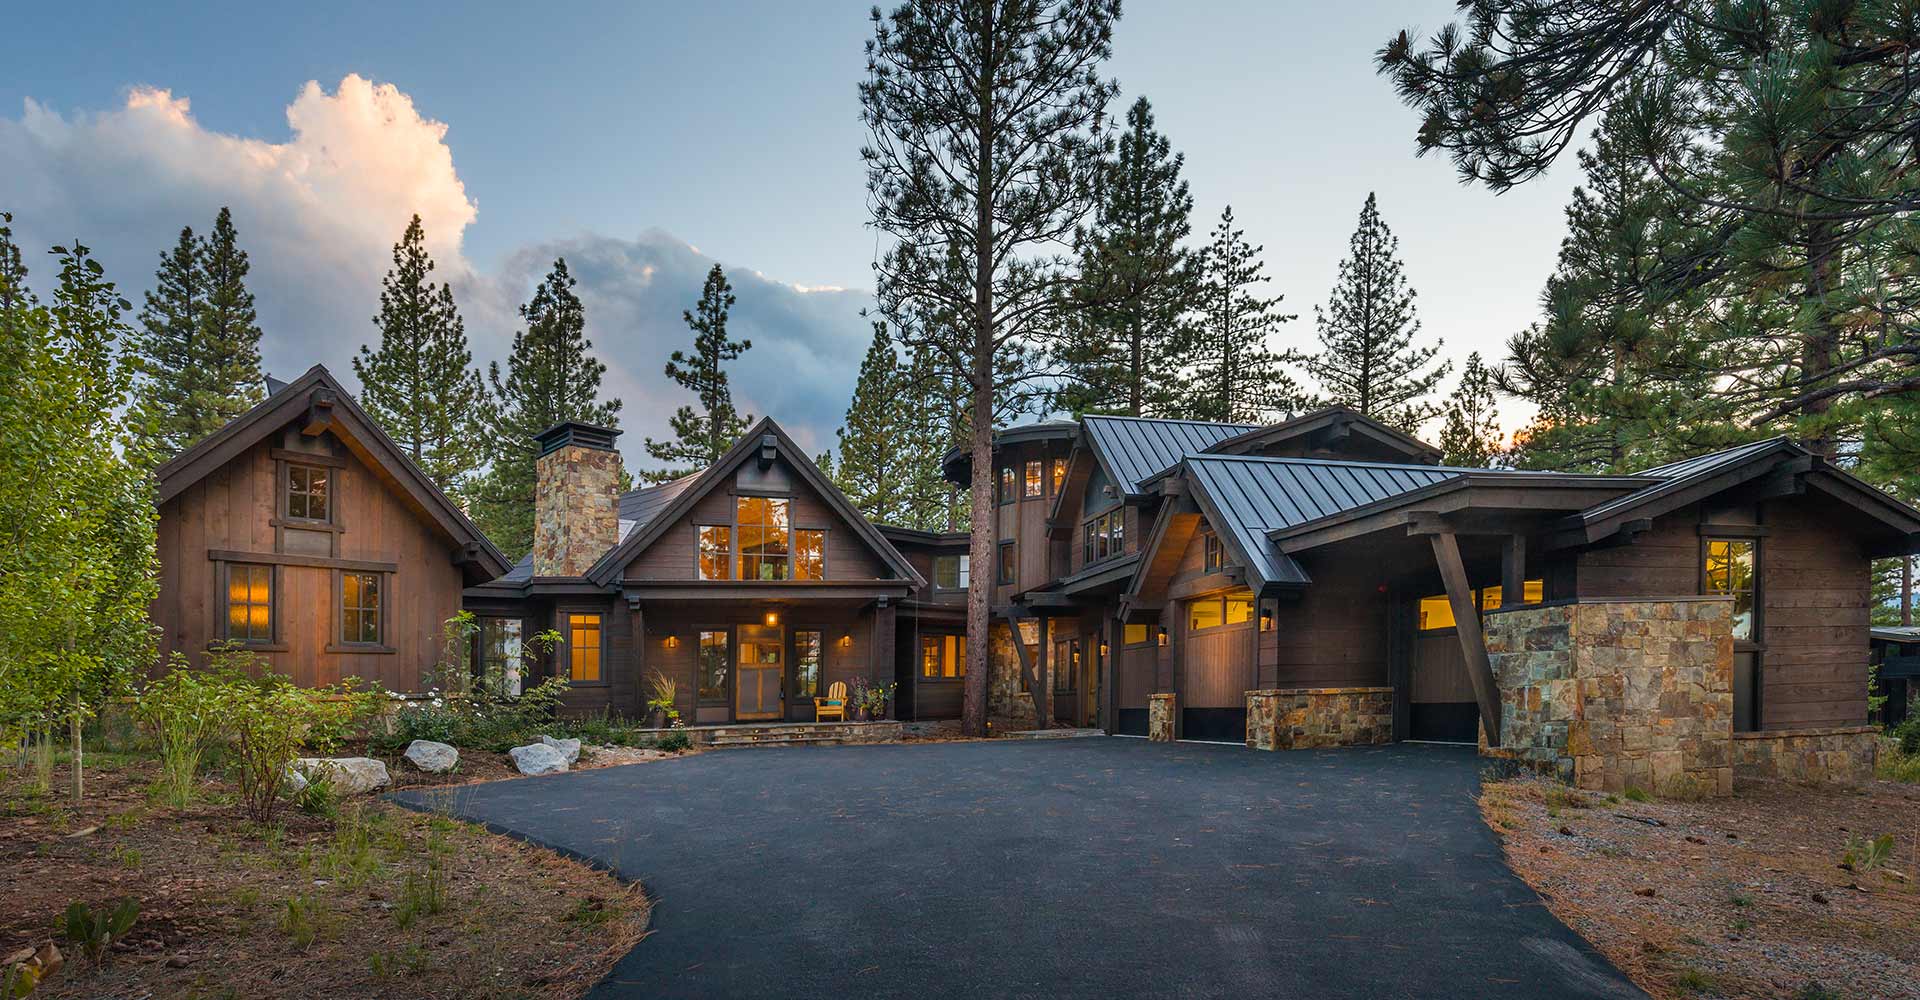 Truckee Luxury homes for sale - 9719 Hunter House Drive